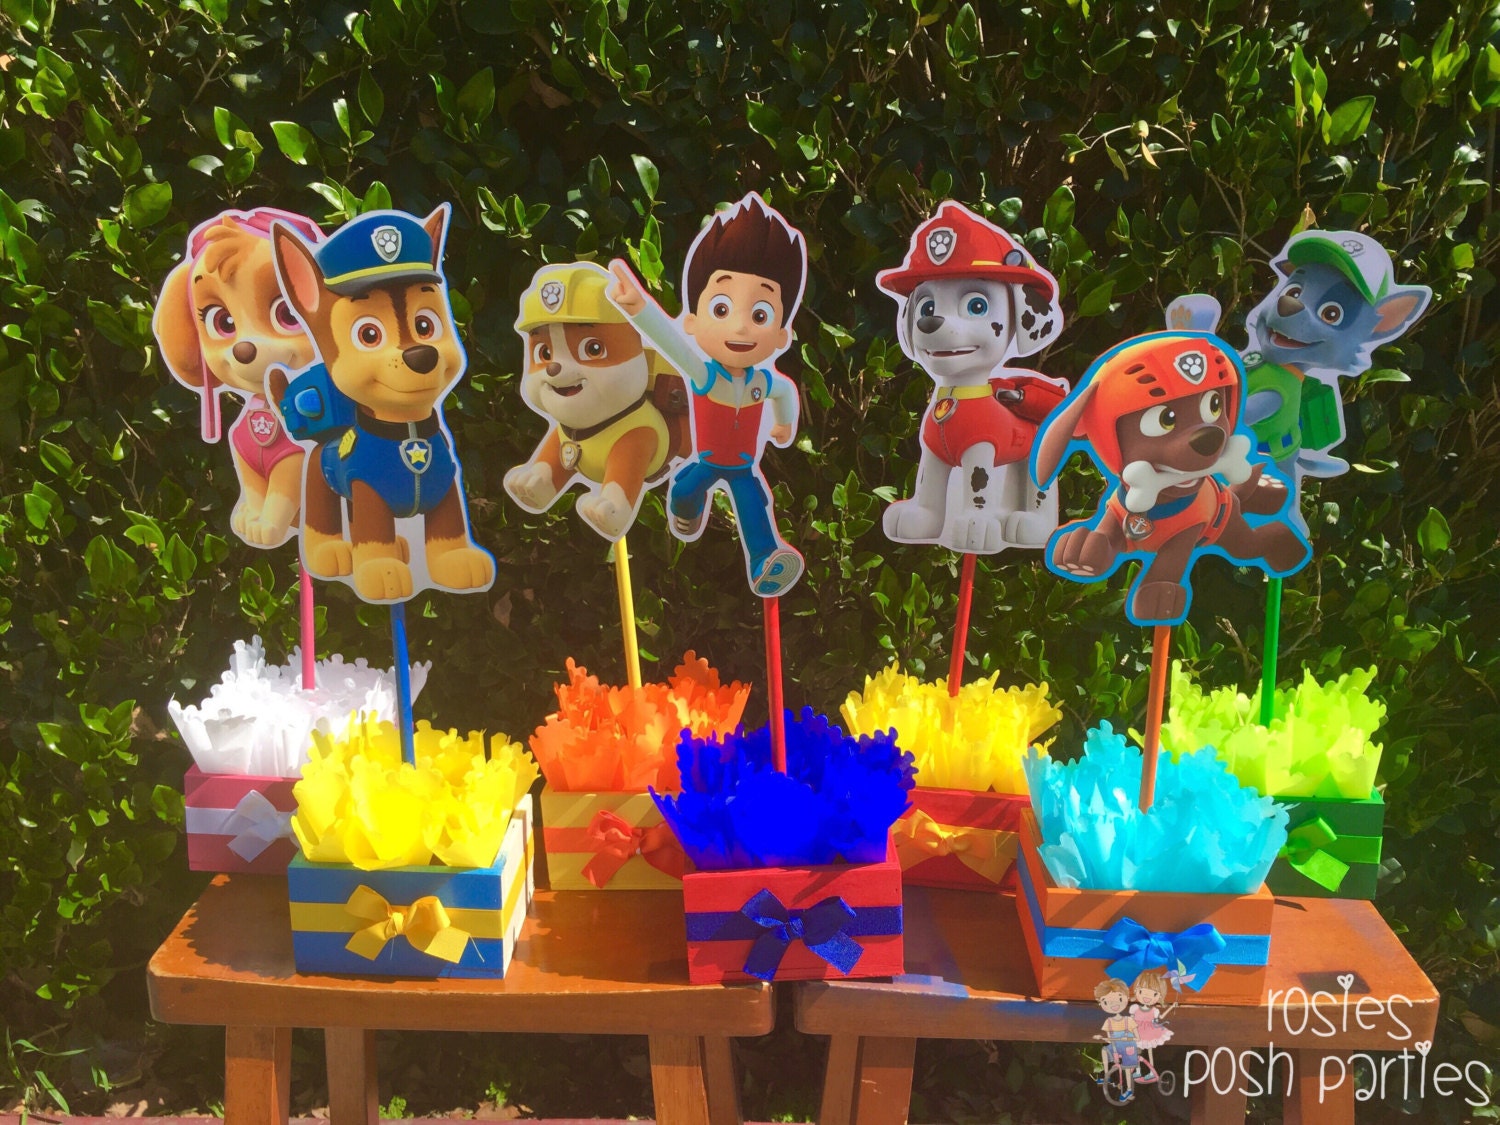 Paw Patrol Centerpieces for Birthday Candy Buffet or Favors